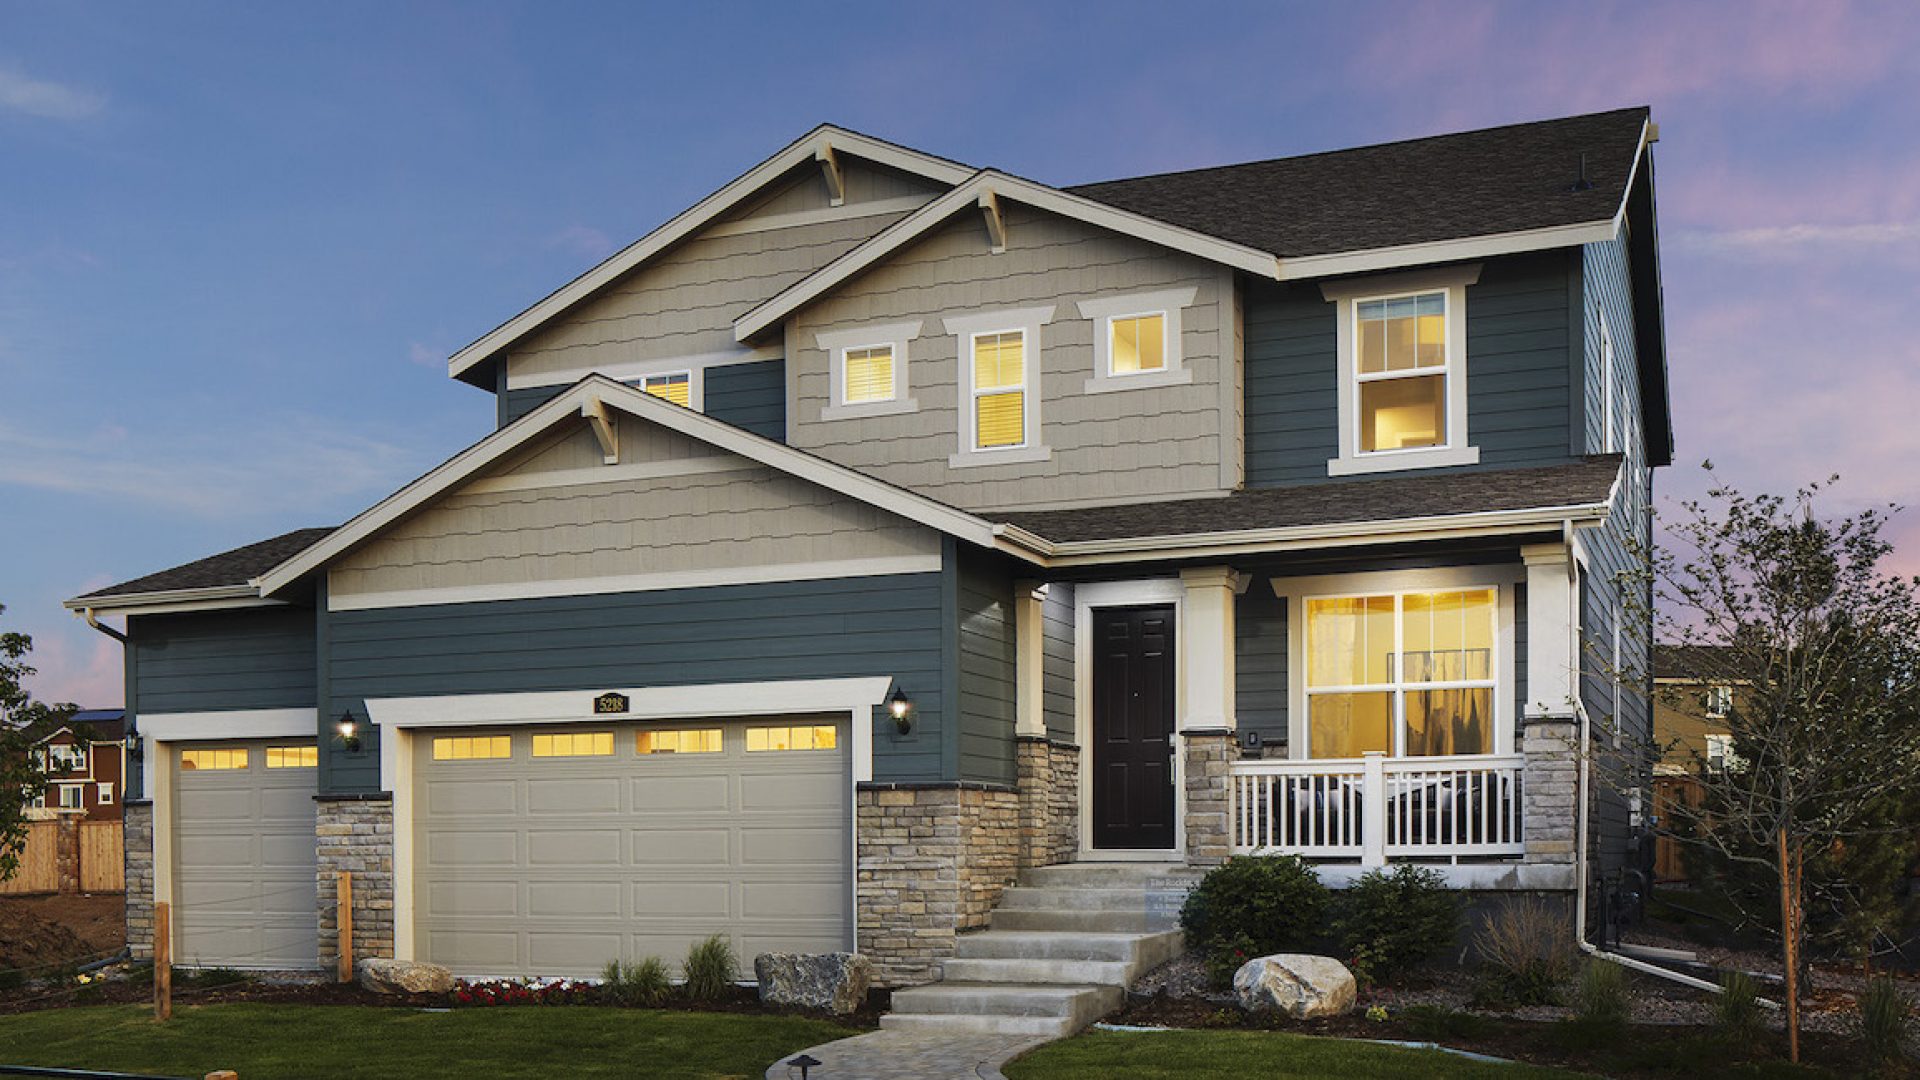 Lennar Willow Bend community homes